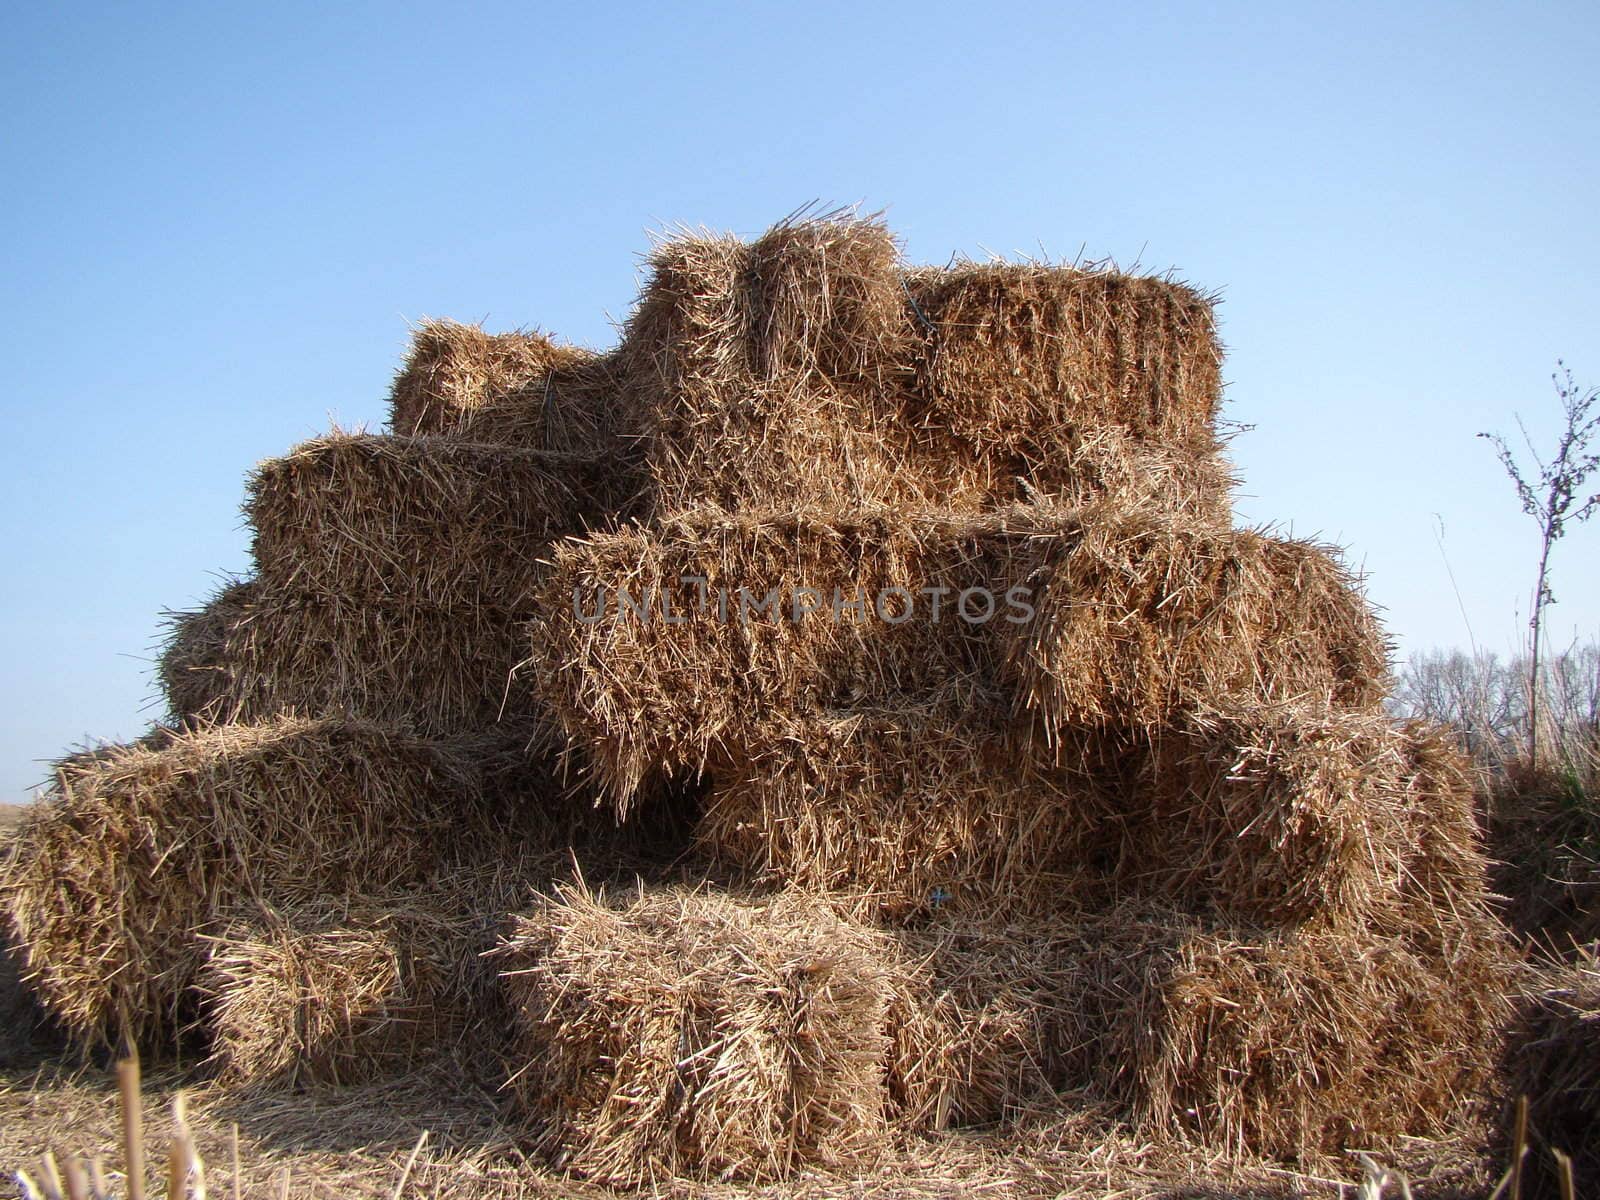 stack of straw